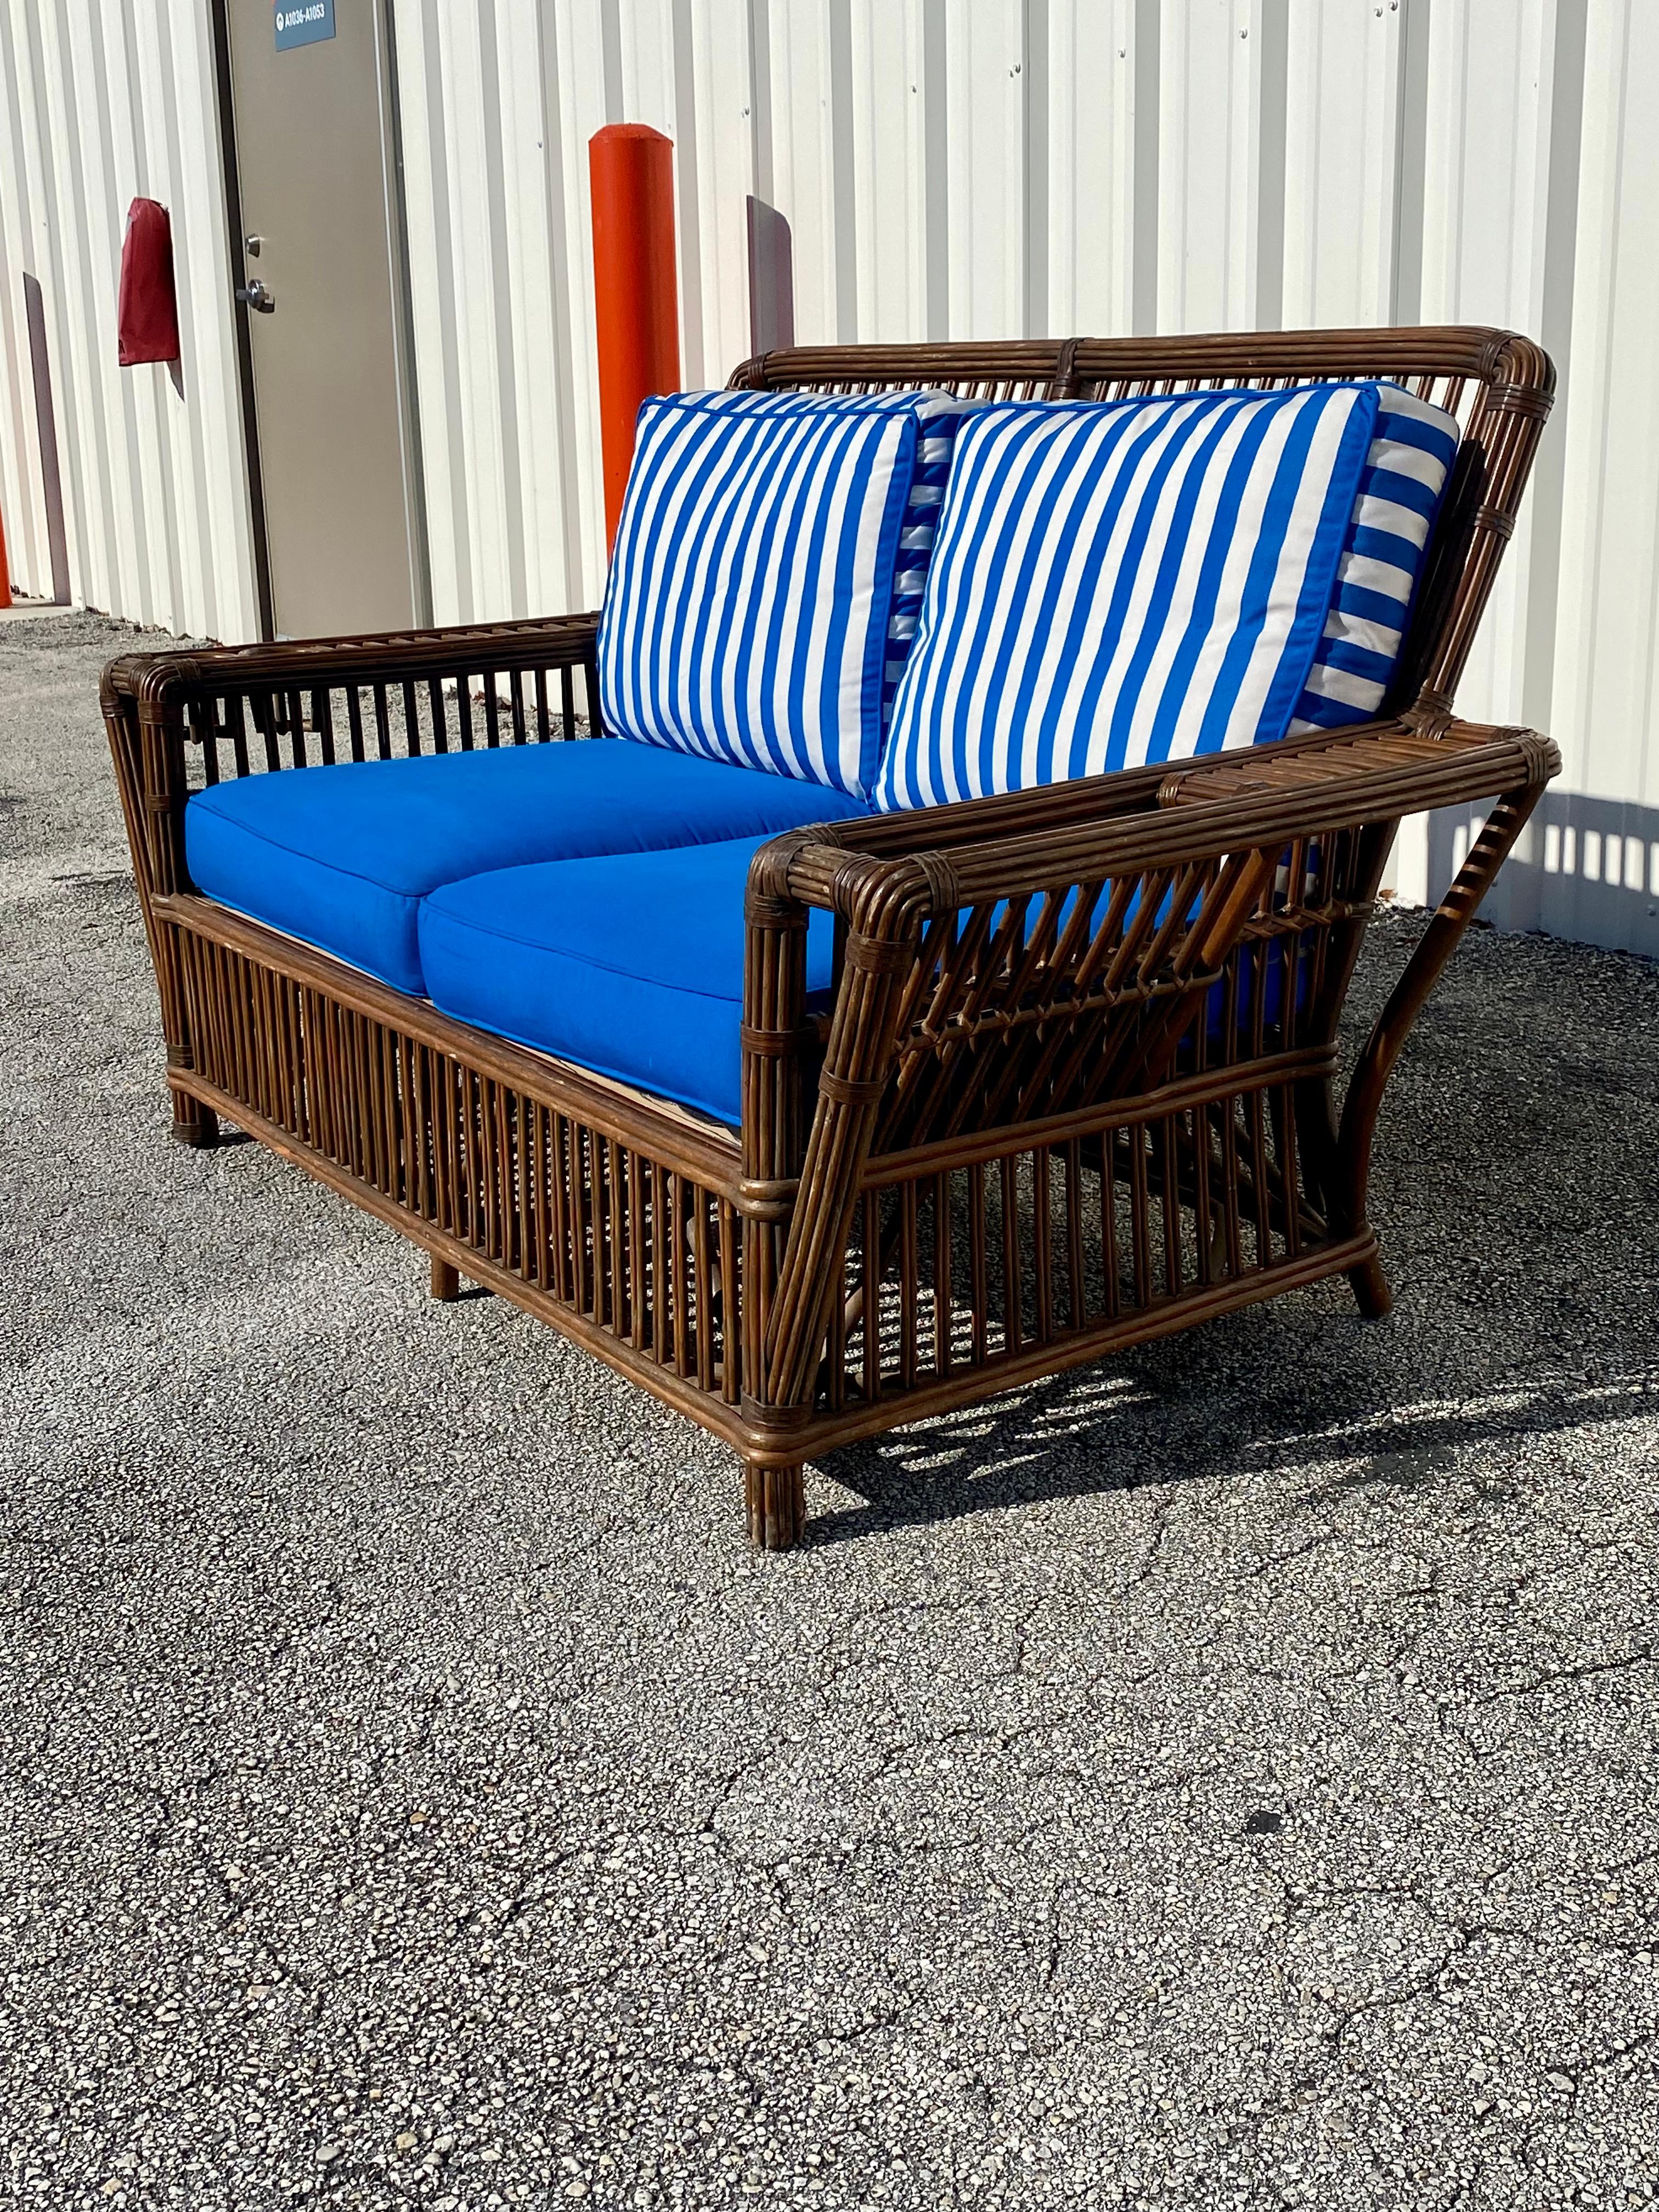 On offer on this occasion is one of the most stunning rattan sofa you could hope to find. This is an ultra-rare opportunity to acquire what is, unequivocally, the best of the best, it being a most spectacular and beautifully presented sofa.